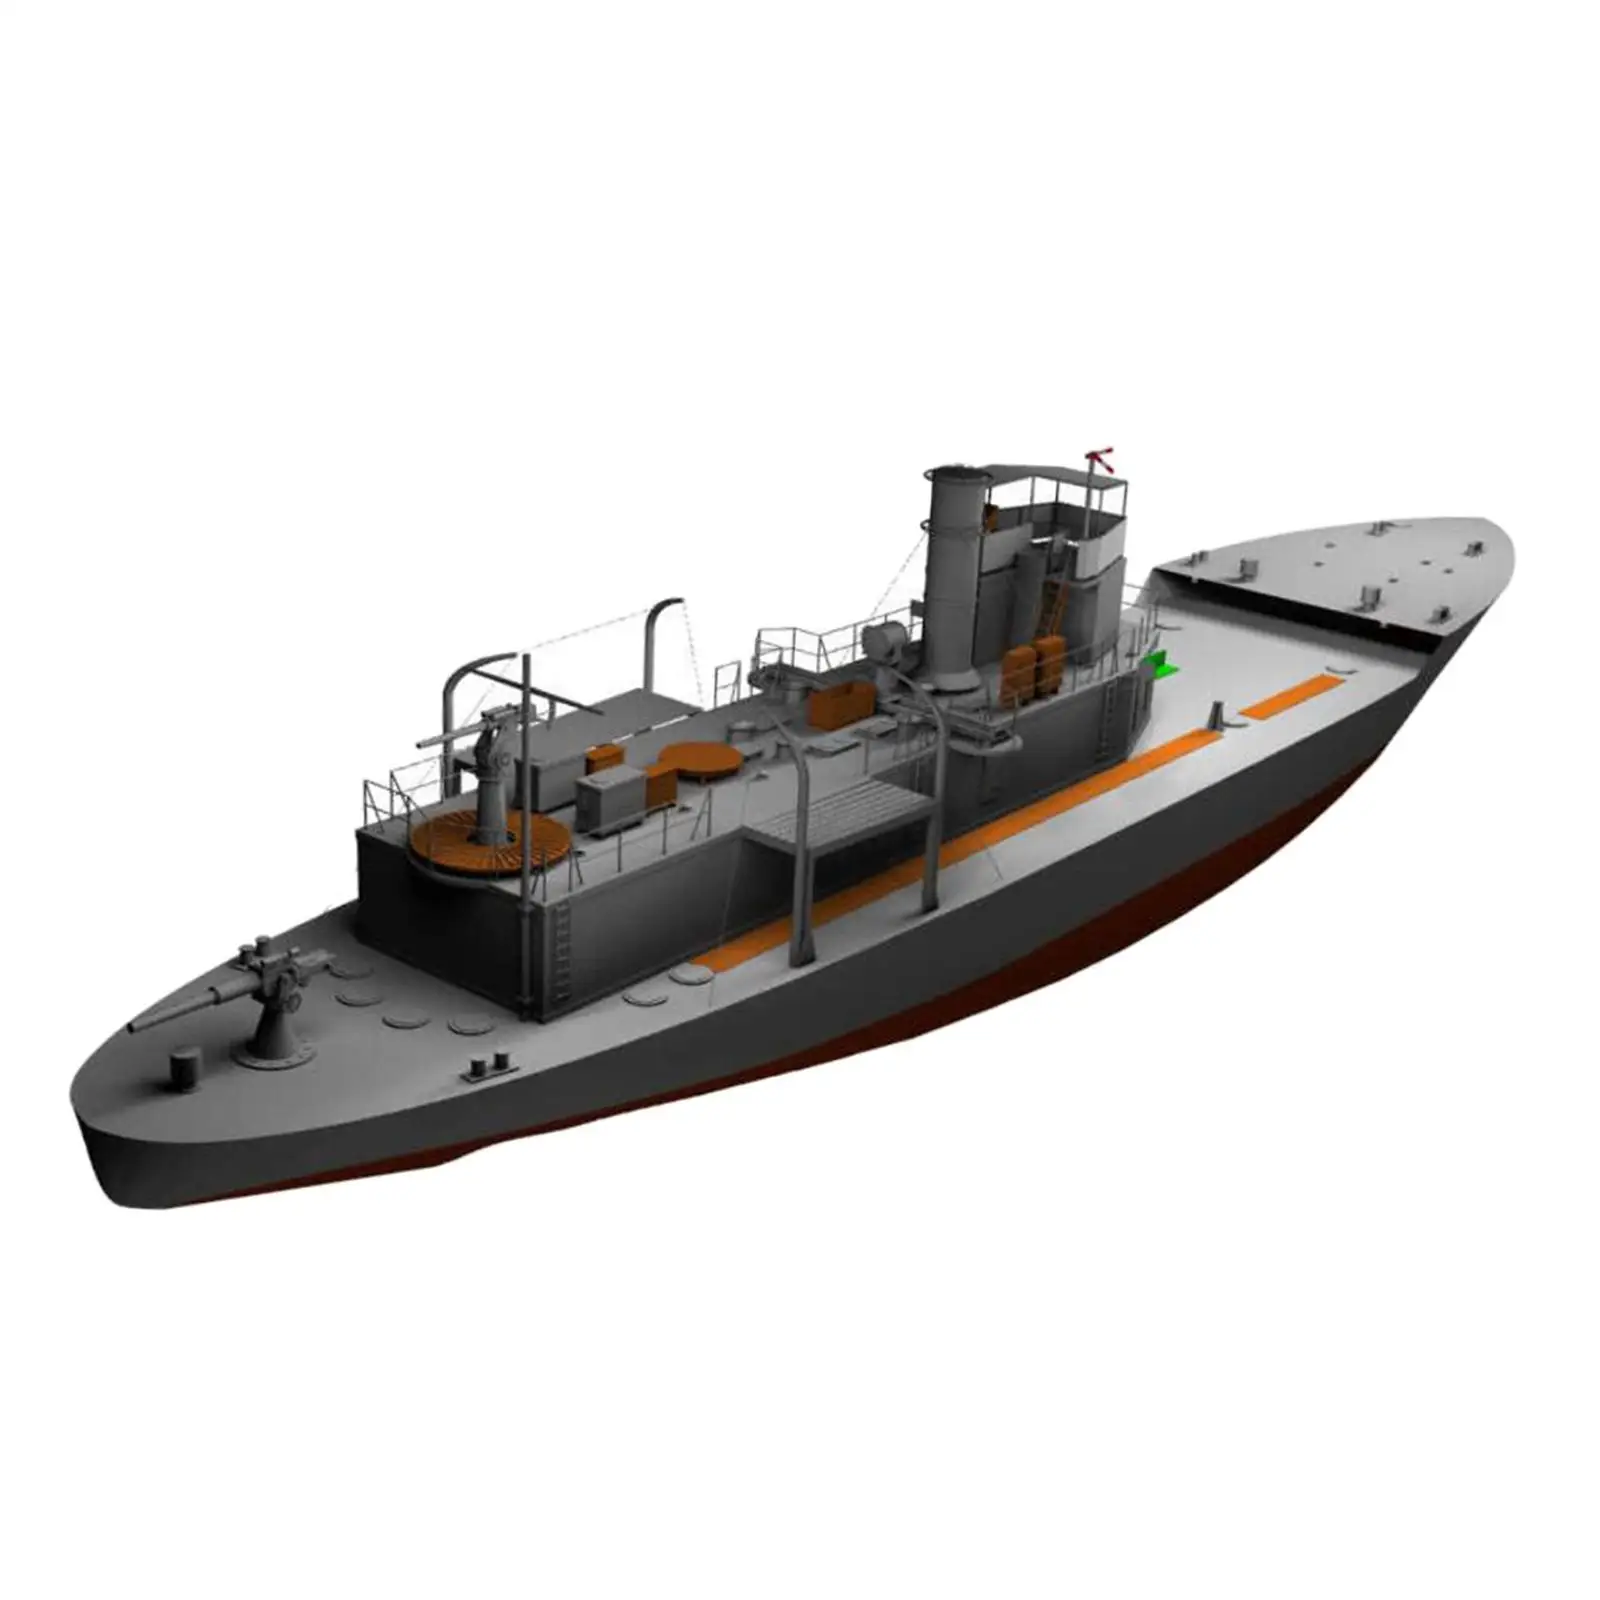 1:100 Scale Ship and Boat Jigsaw Puzzles Patrol Boat Scale Model Patrol Boat Kits for Kids